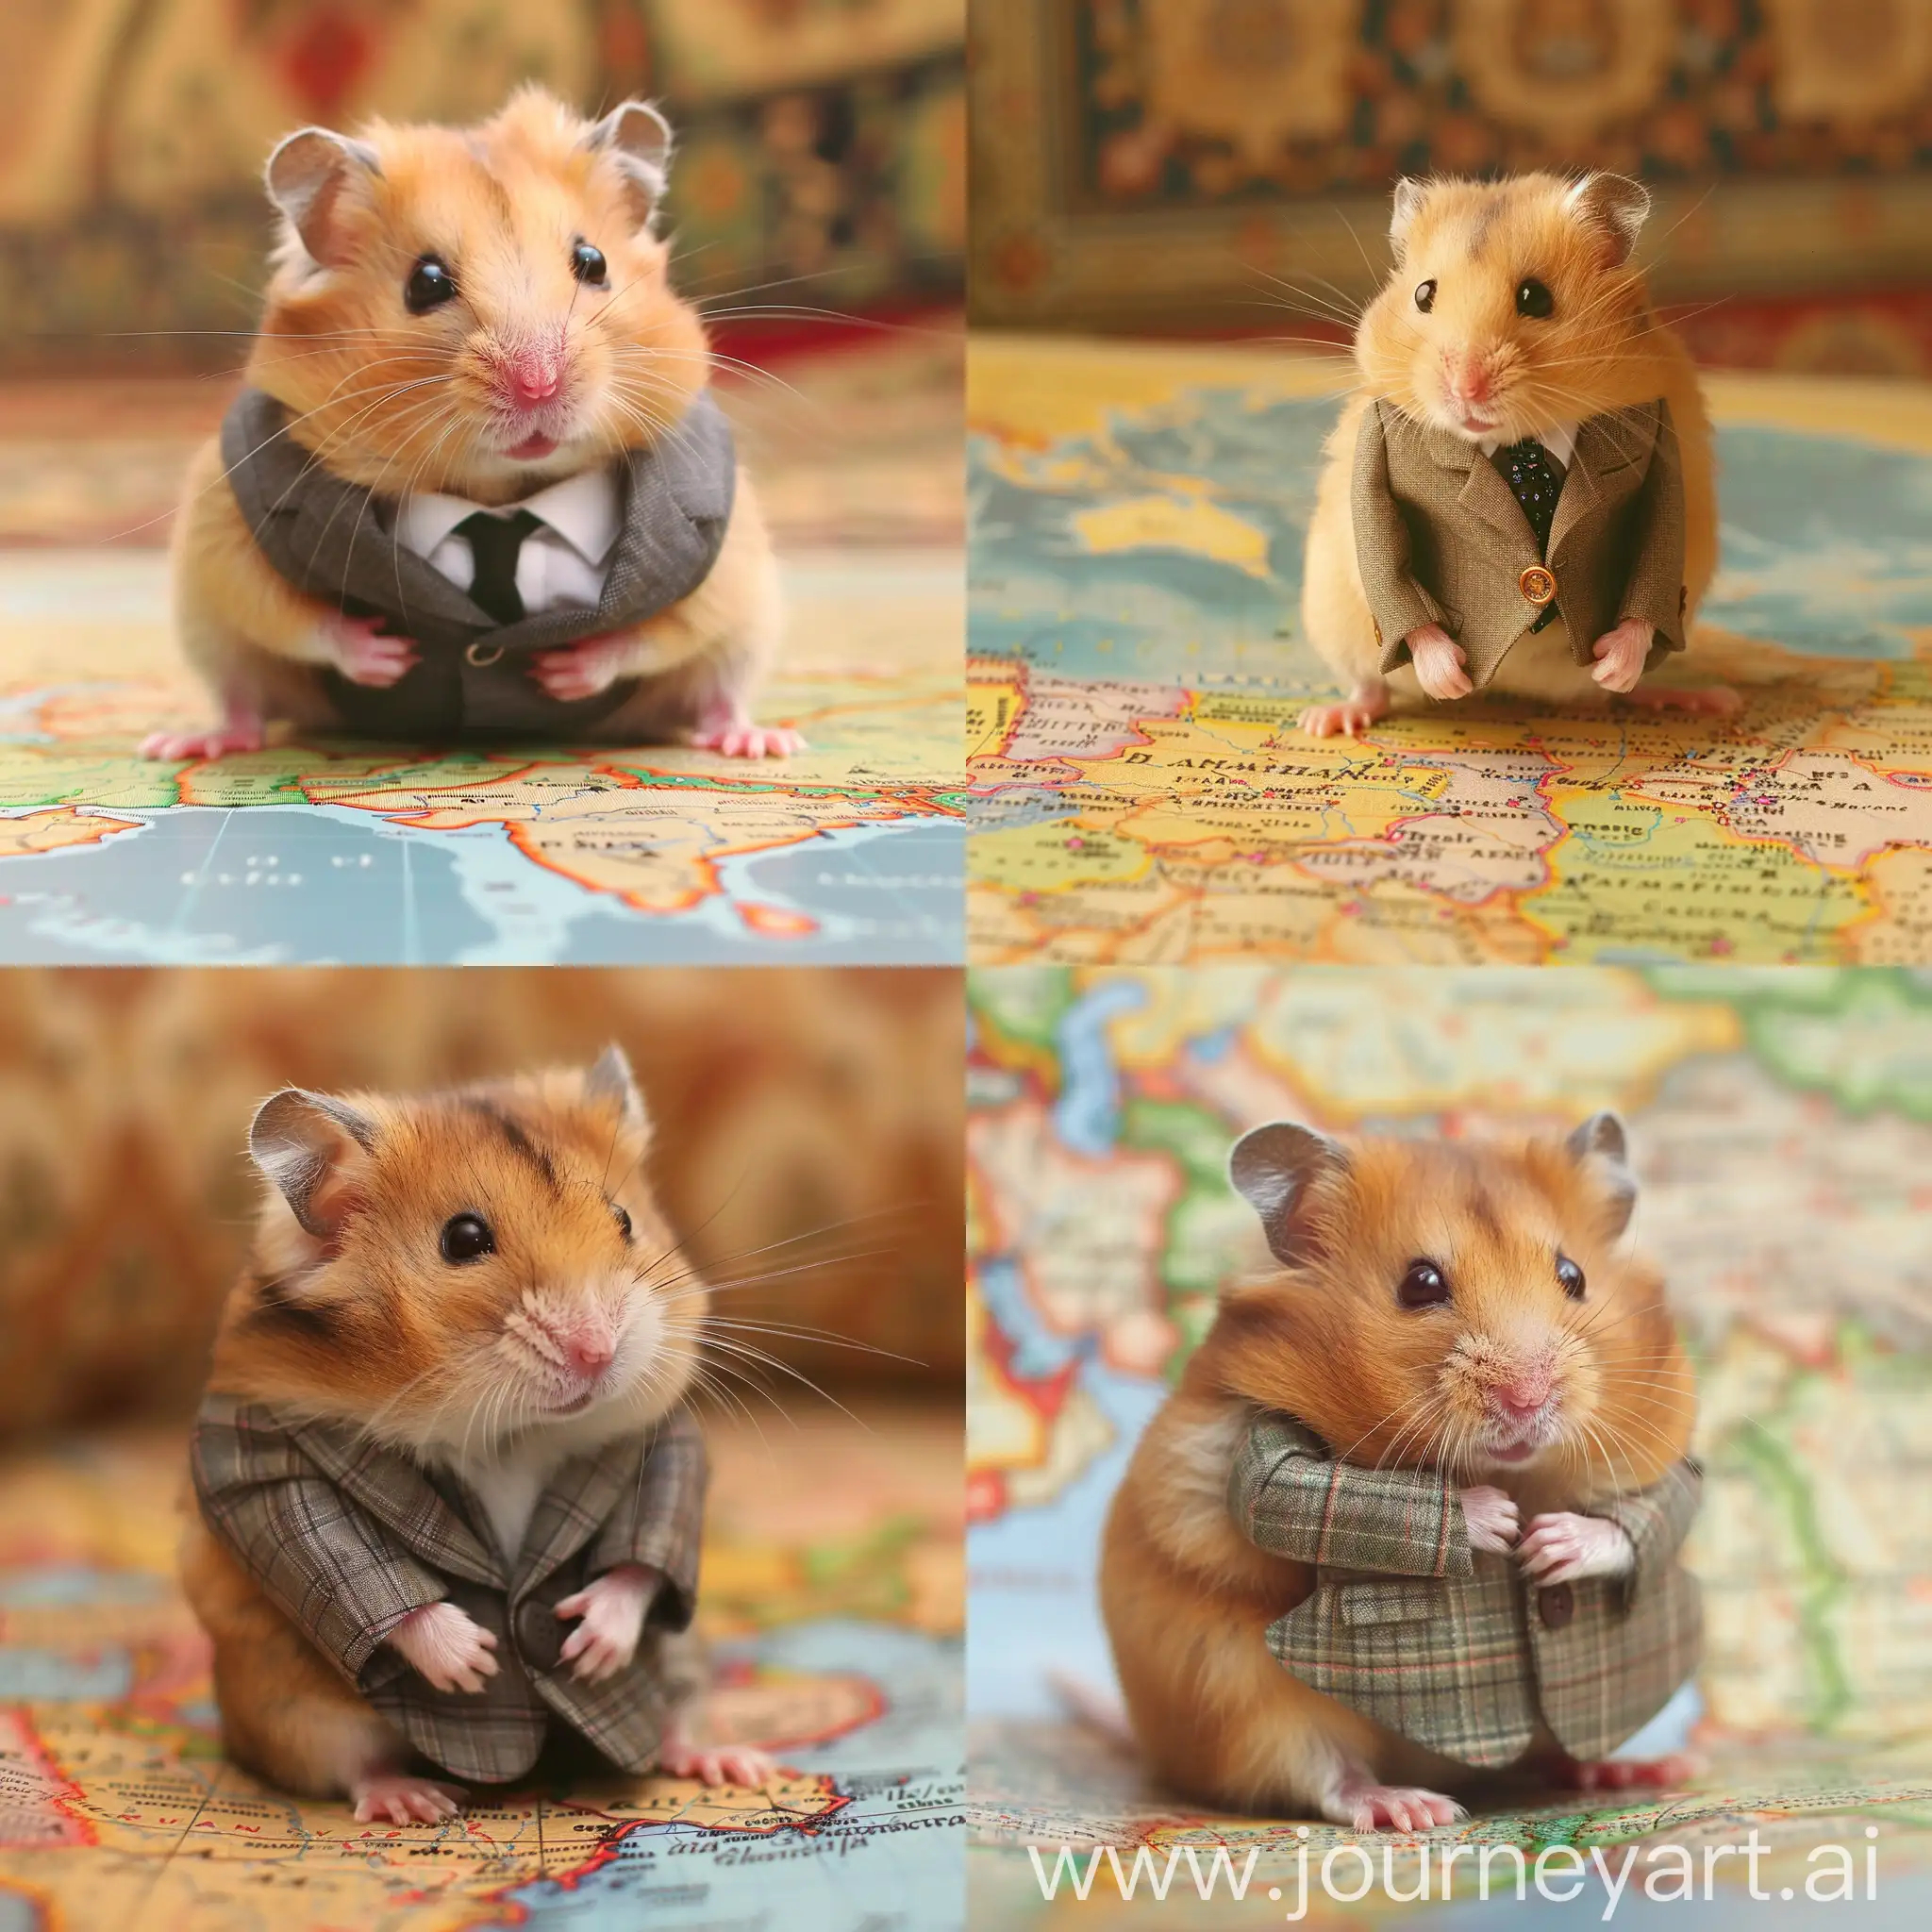 Business-Hamster-Wearing-Suits-Sitting-on-Iran-Map